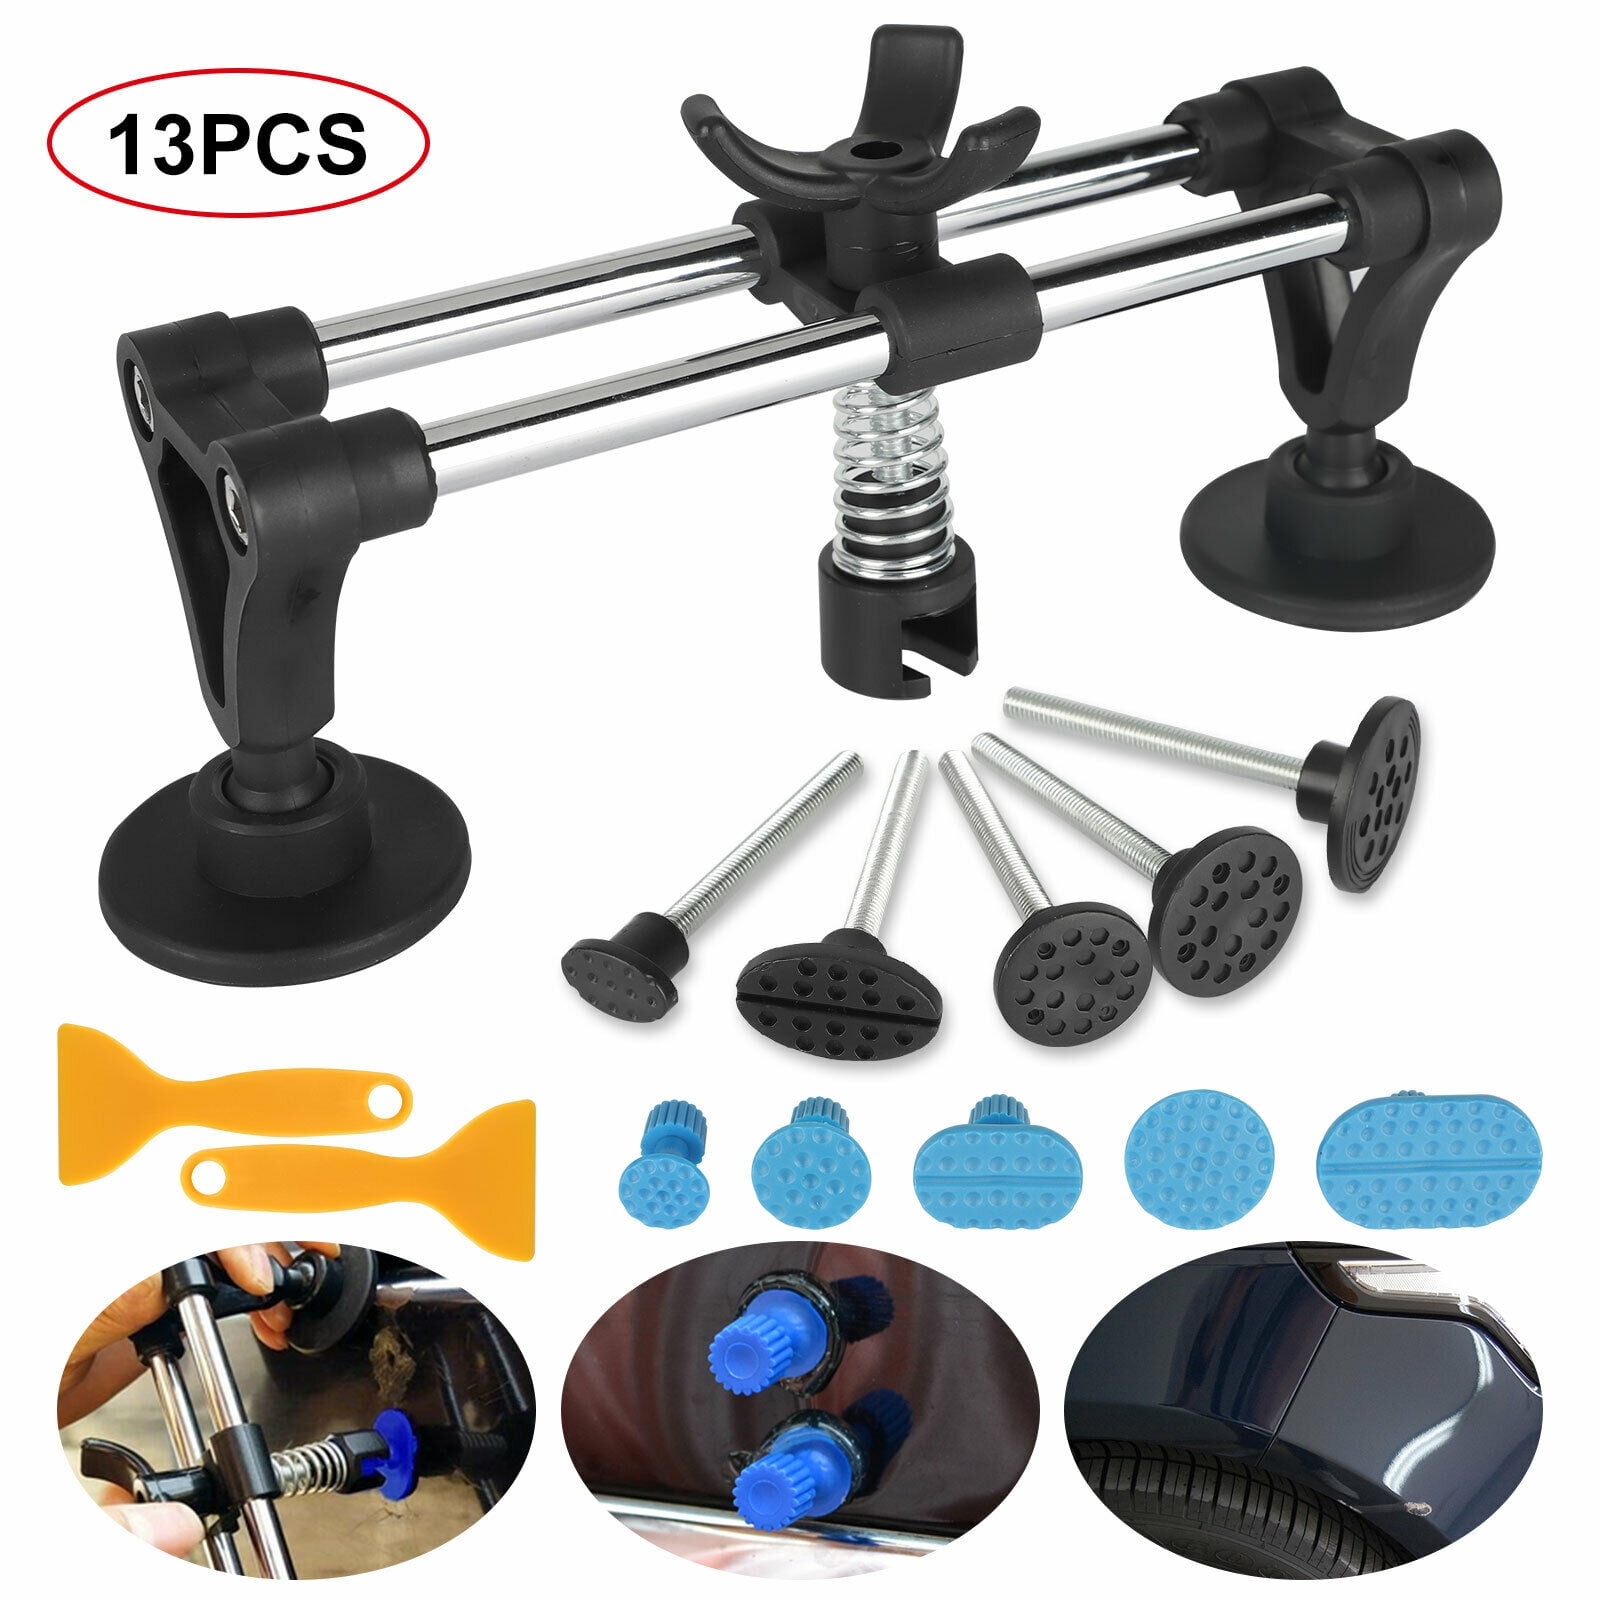 Tool set Auto Car Body Dent Ding Remover Repair Puller Sucker Panel Suction Cup 